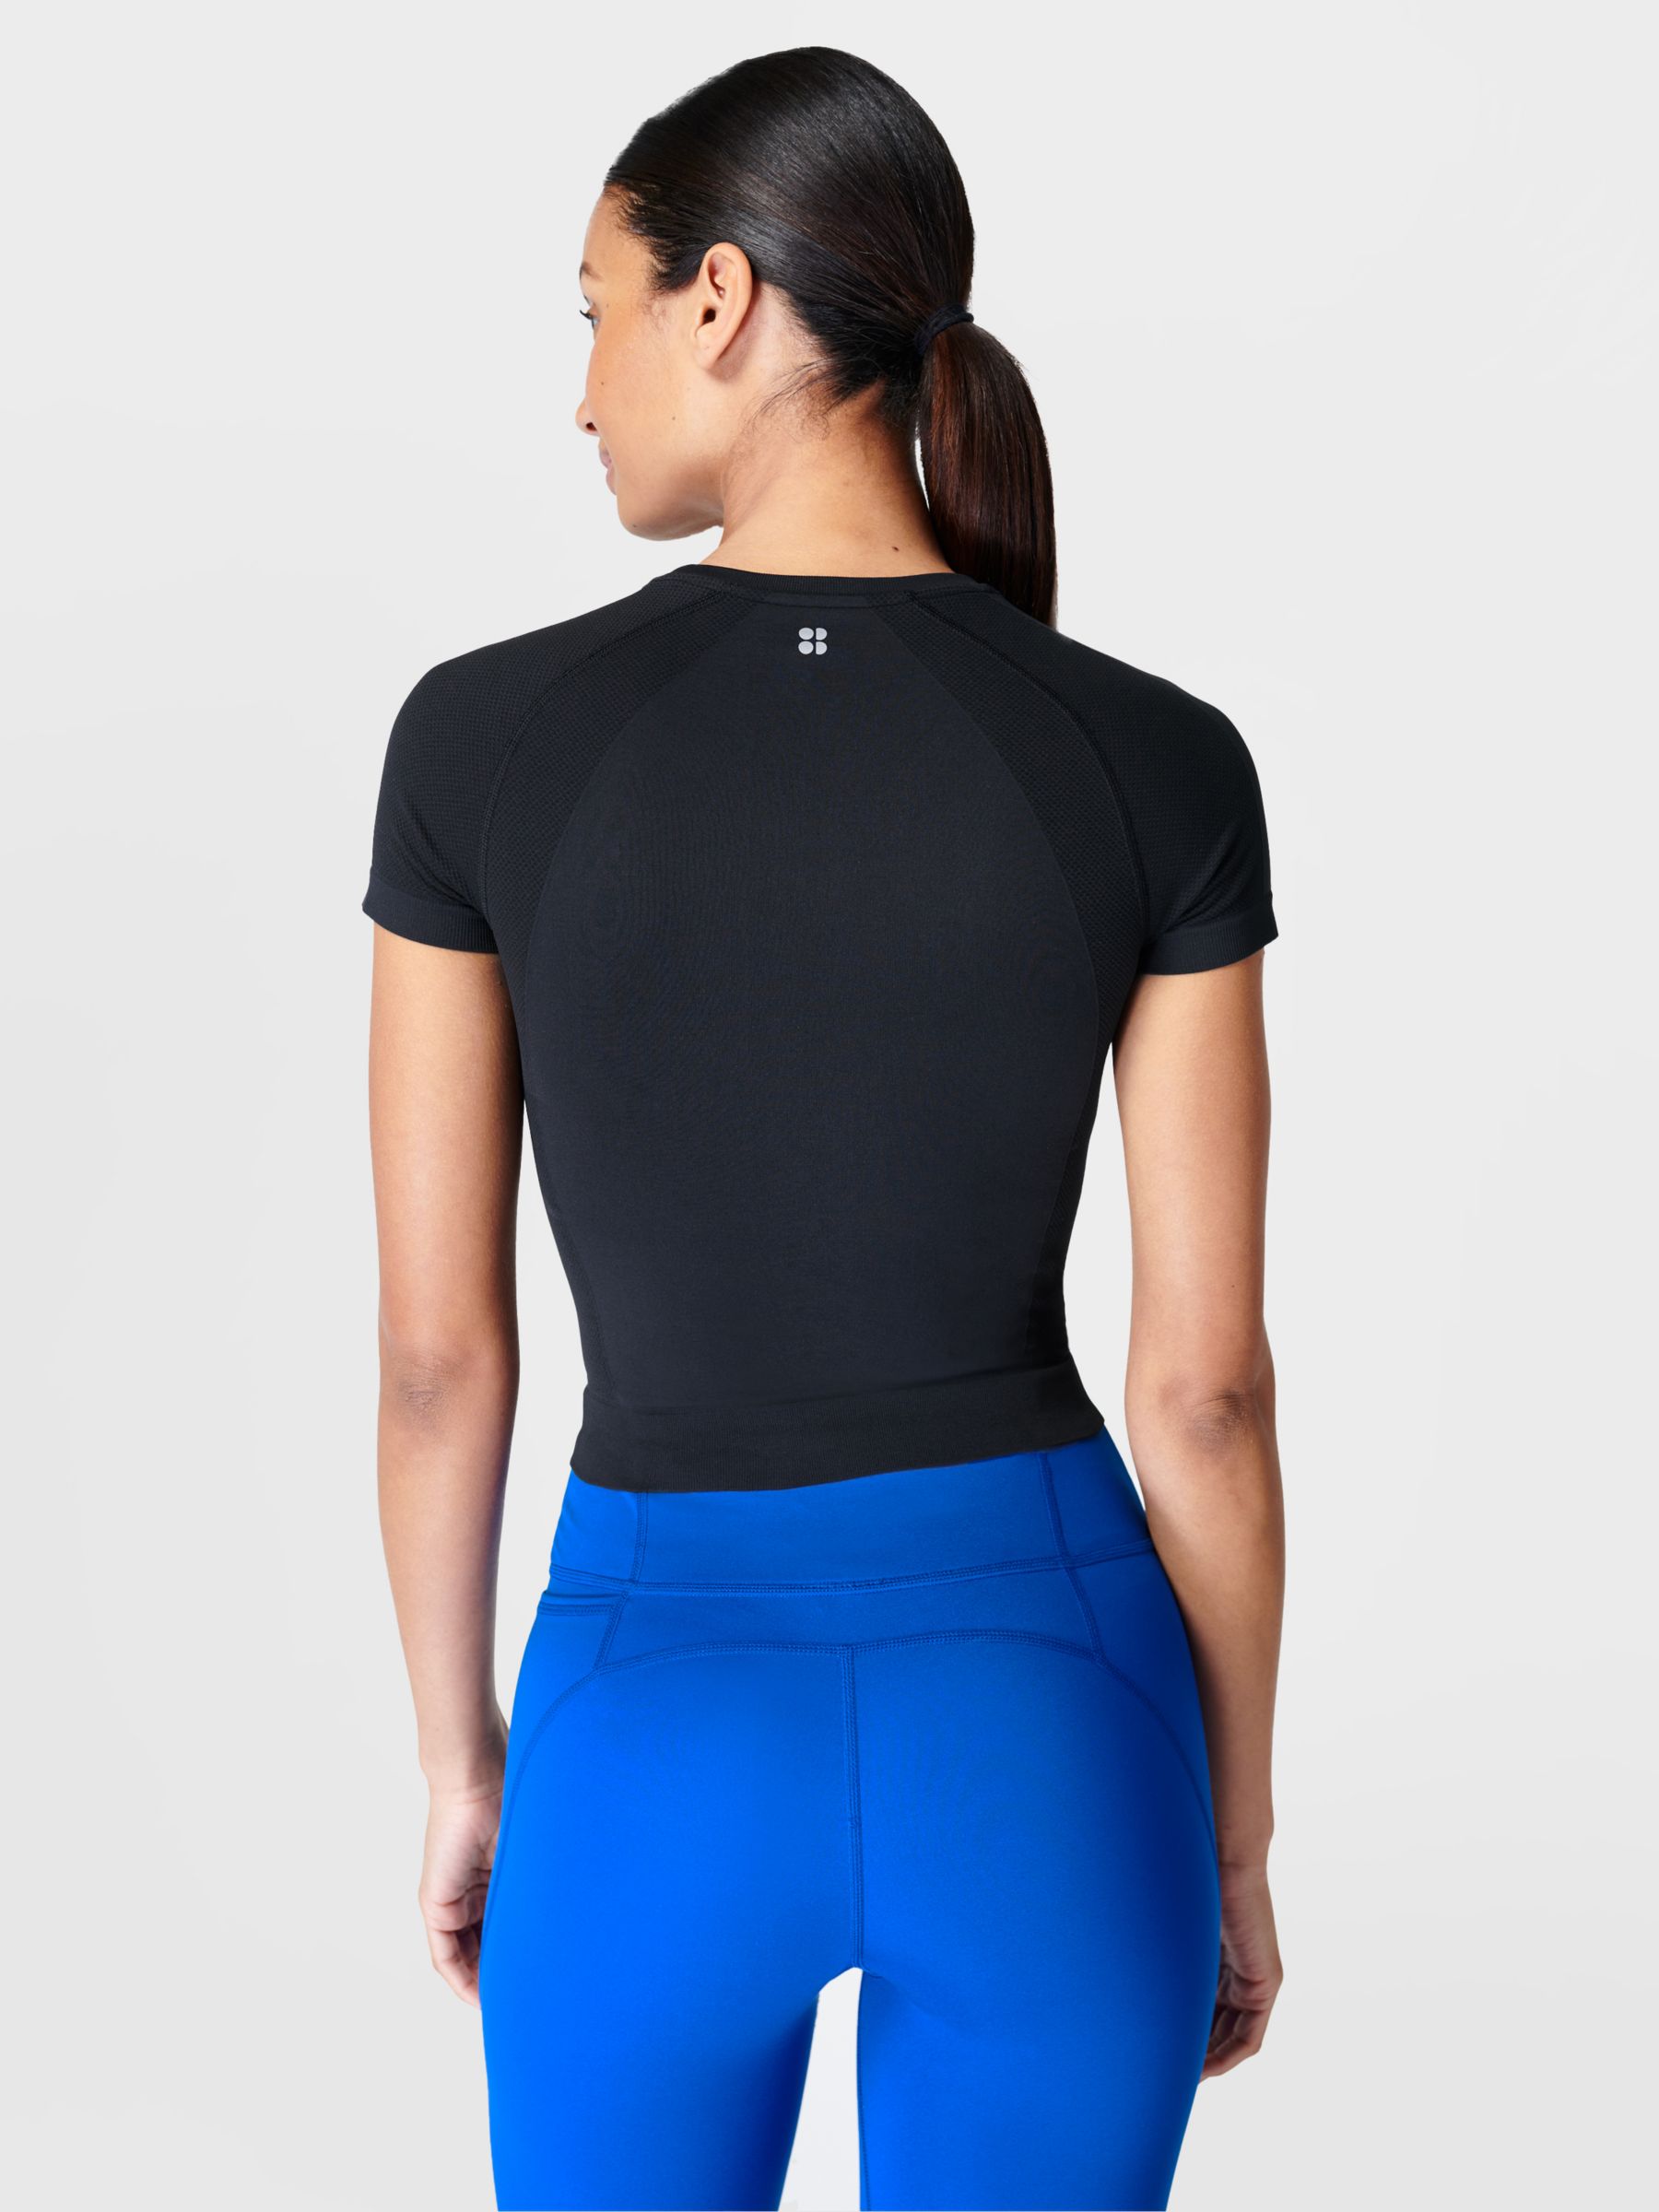 Buy Sweaty Betty Athlete Crop Seamless Workout Top Online at johnlewis.com